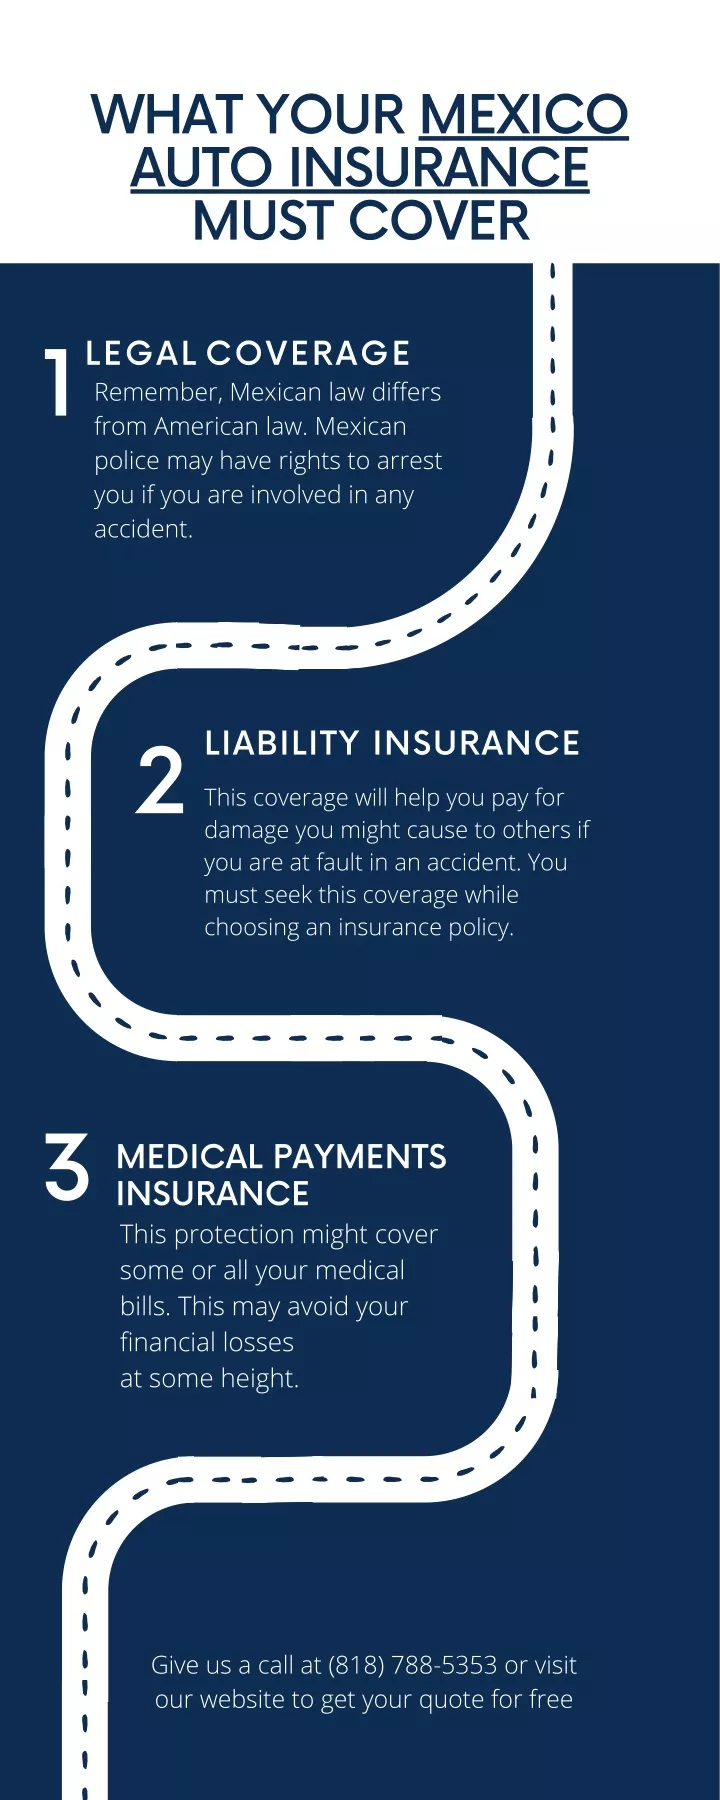 what your mexico auto insurance must cover